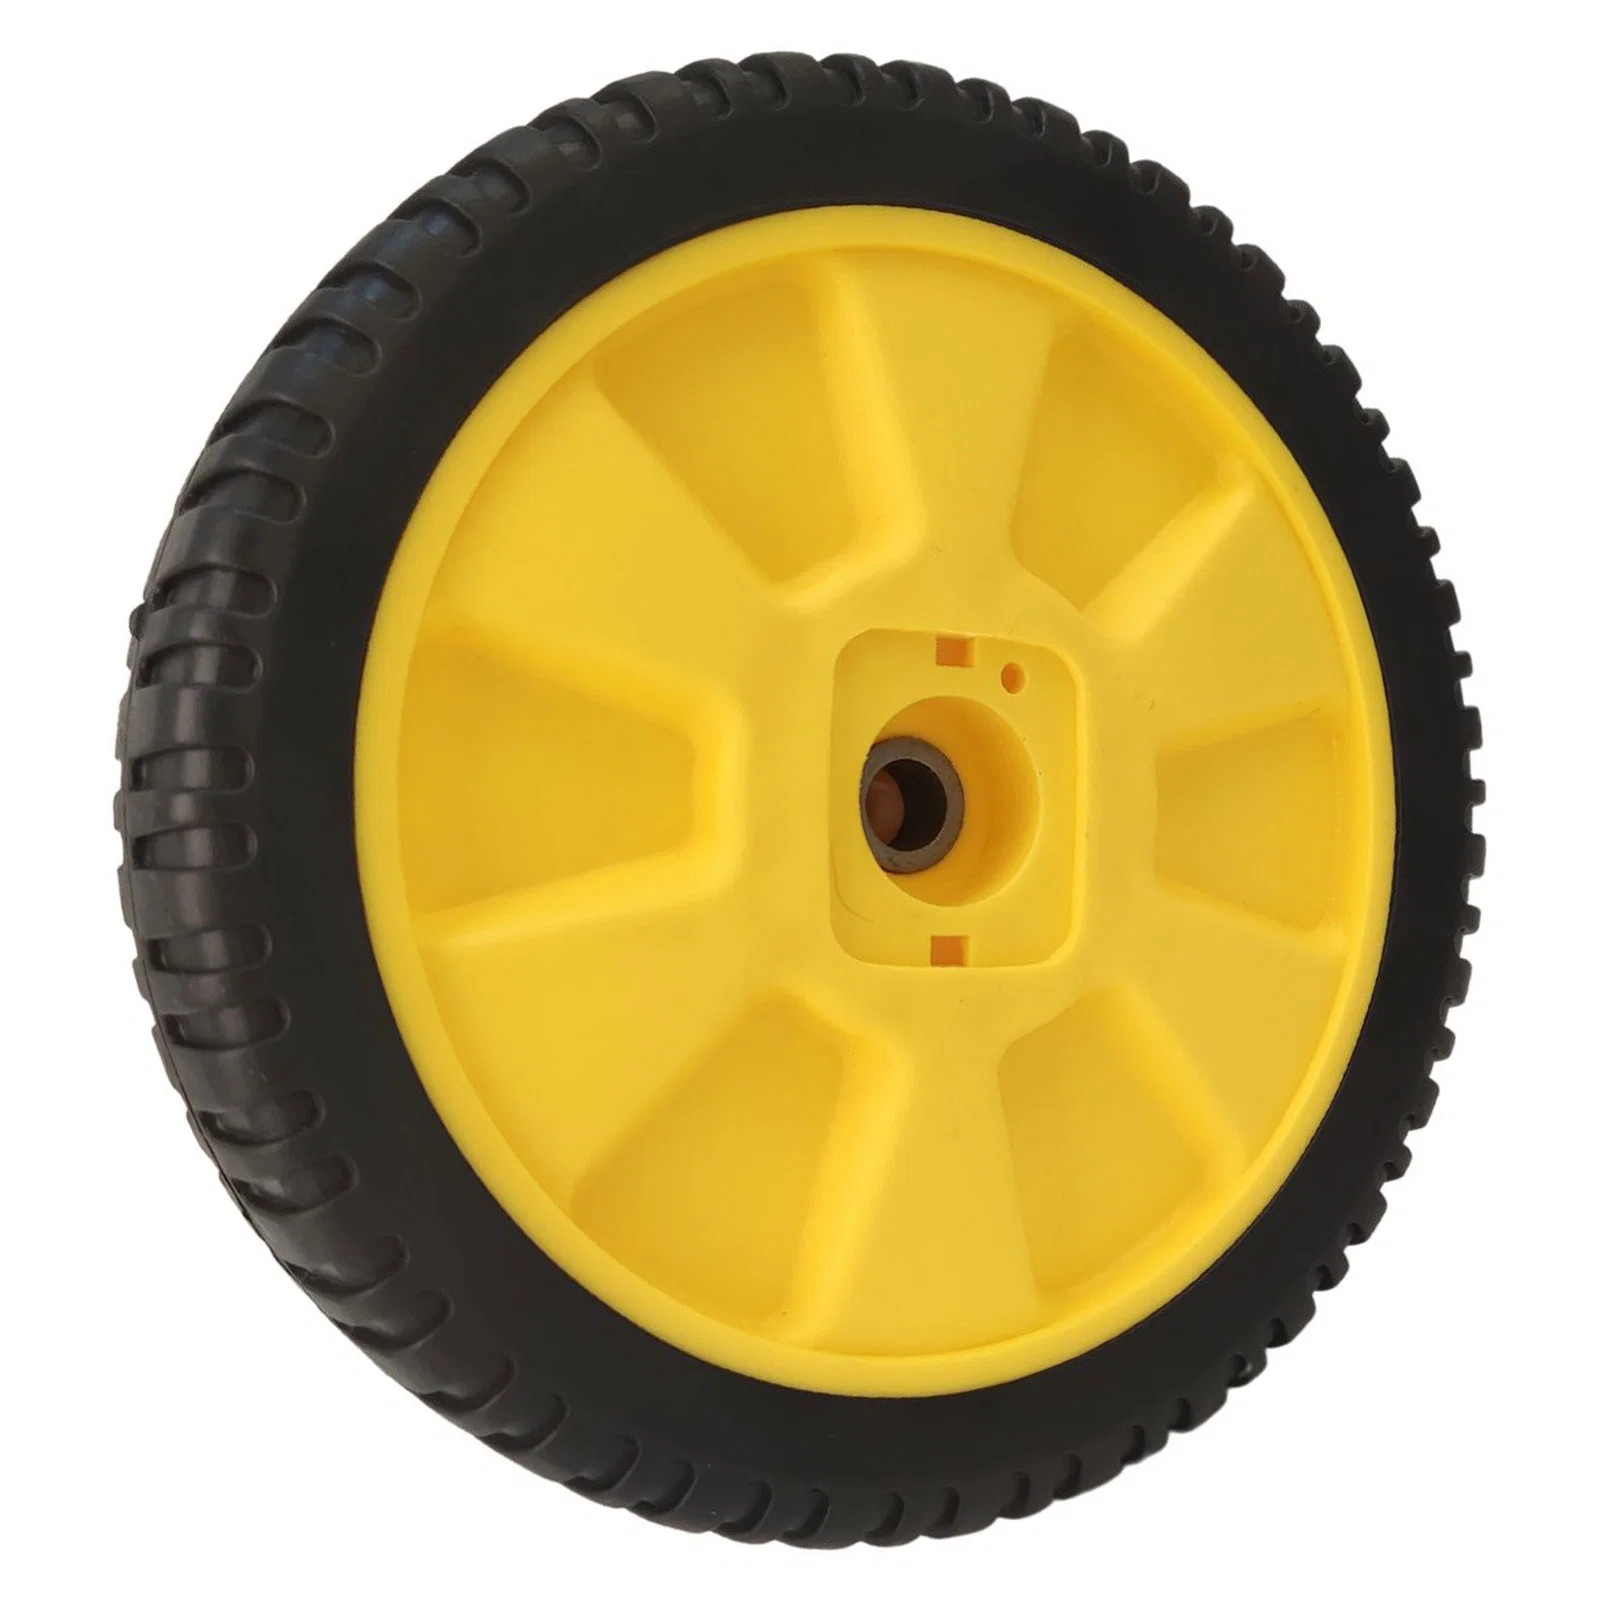 Lw0808 8X2" Inch Lawnmower Replacement Wheel and Tires for Garden Lawn Mower